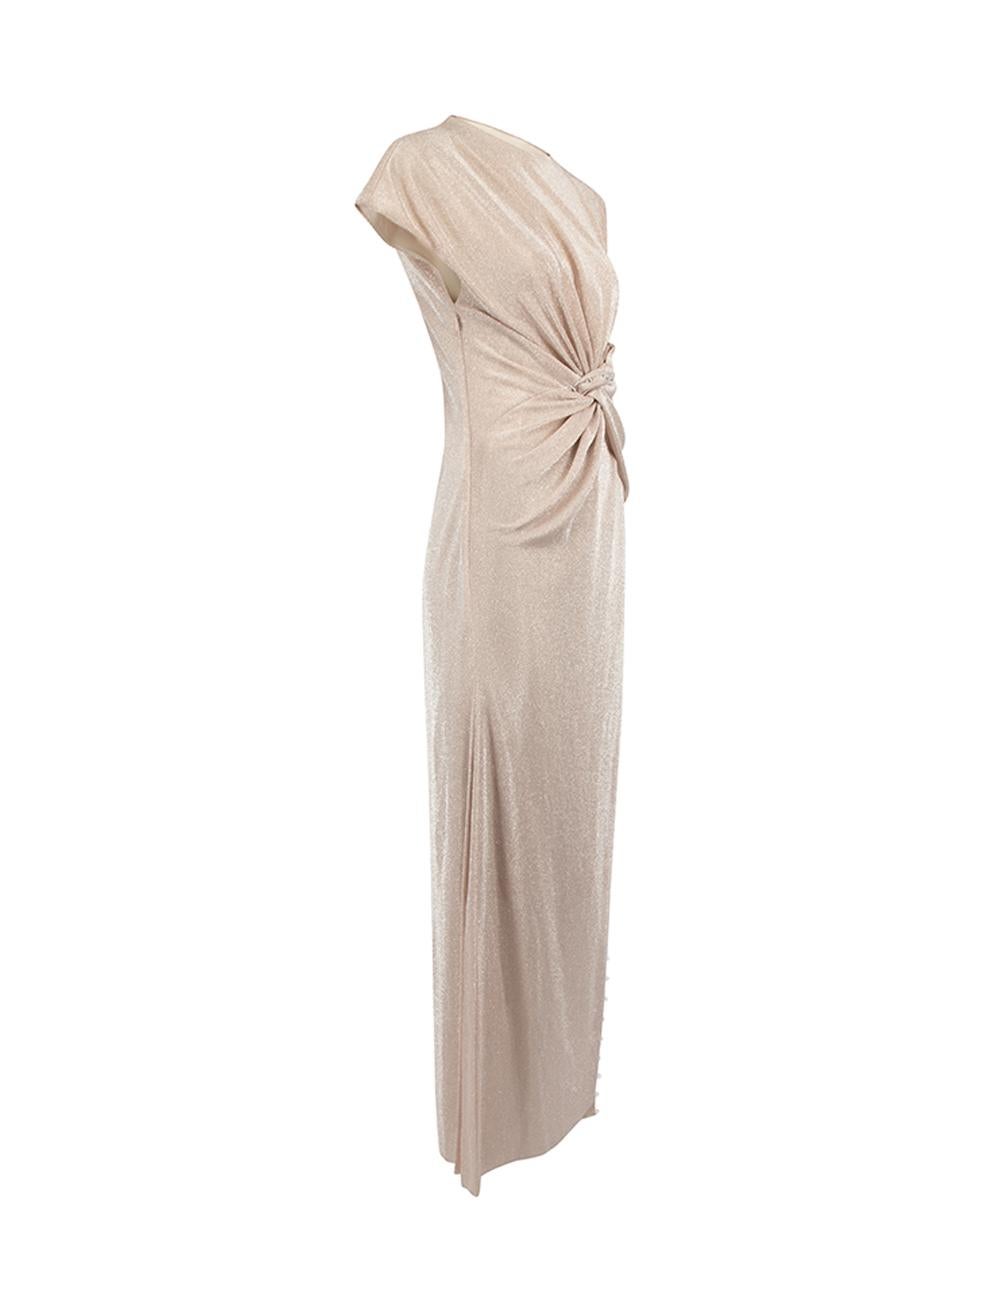 CONDITION is Never worn, with tags. No visible wear to dress is evident on this new Lanvin designer resale item. Details Metallic pink Synthetic Midi asymmetric dress Round neckline Knot detail on front Clear beads embellishments Back keyhole